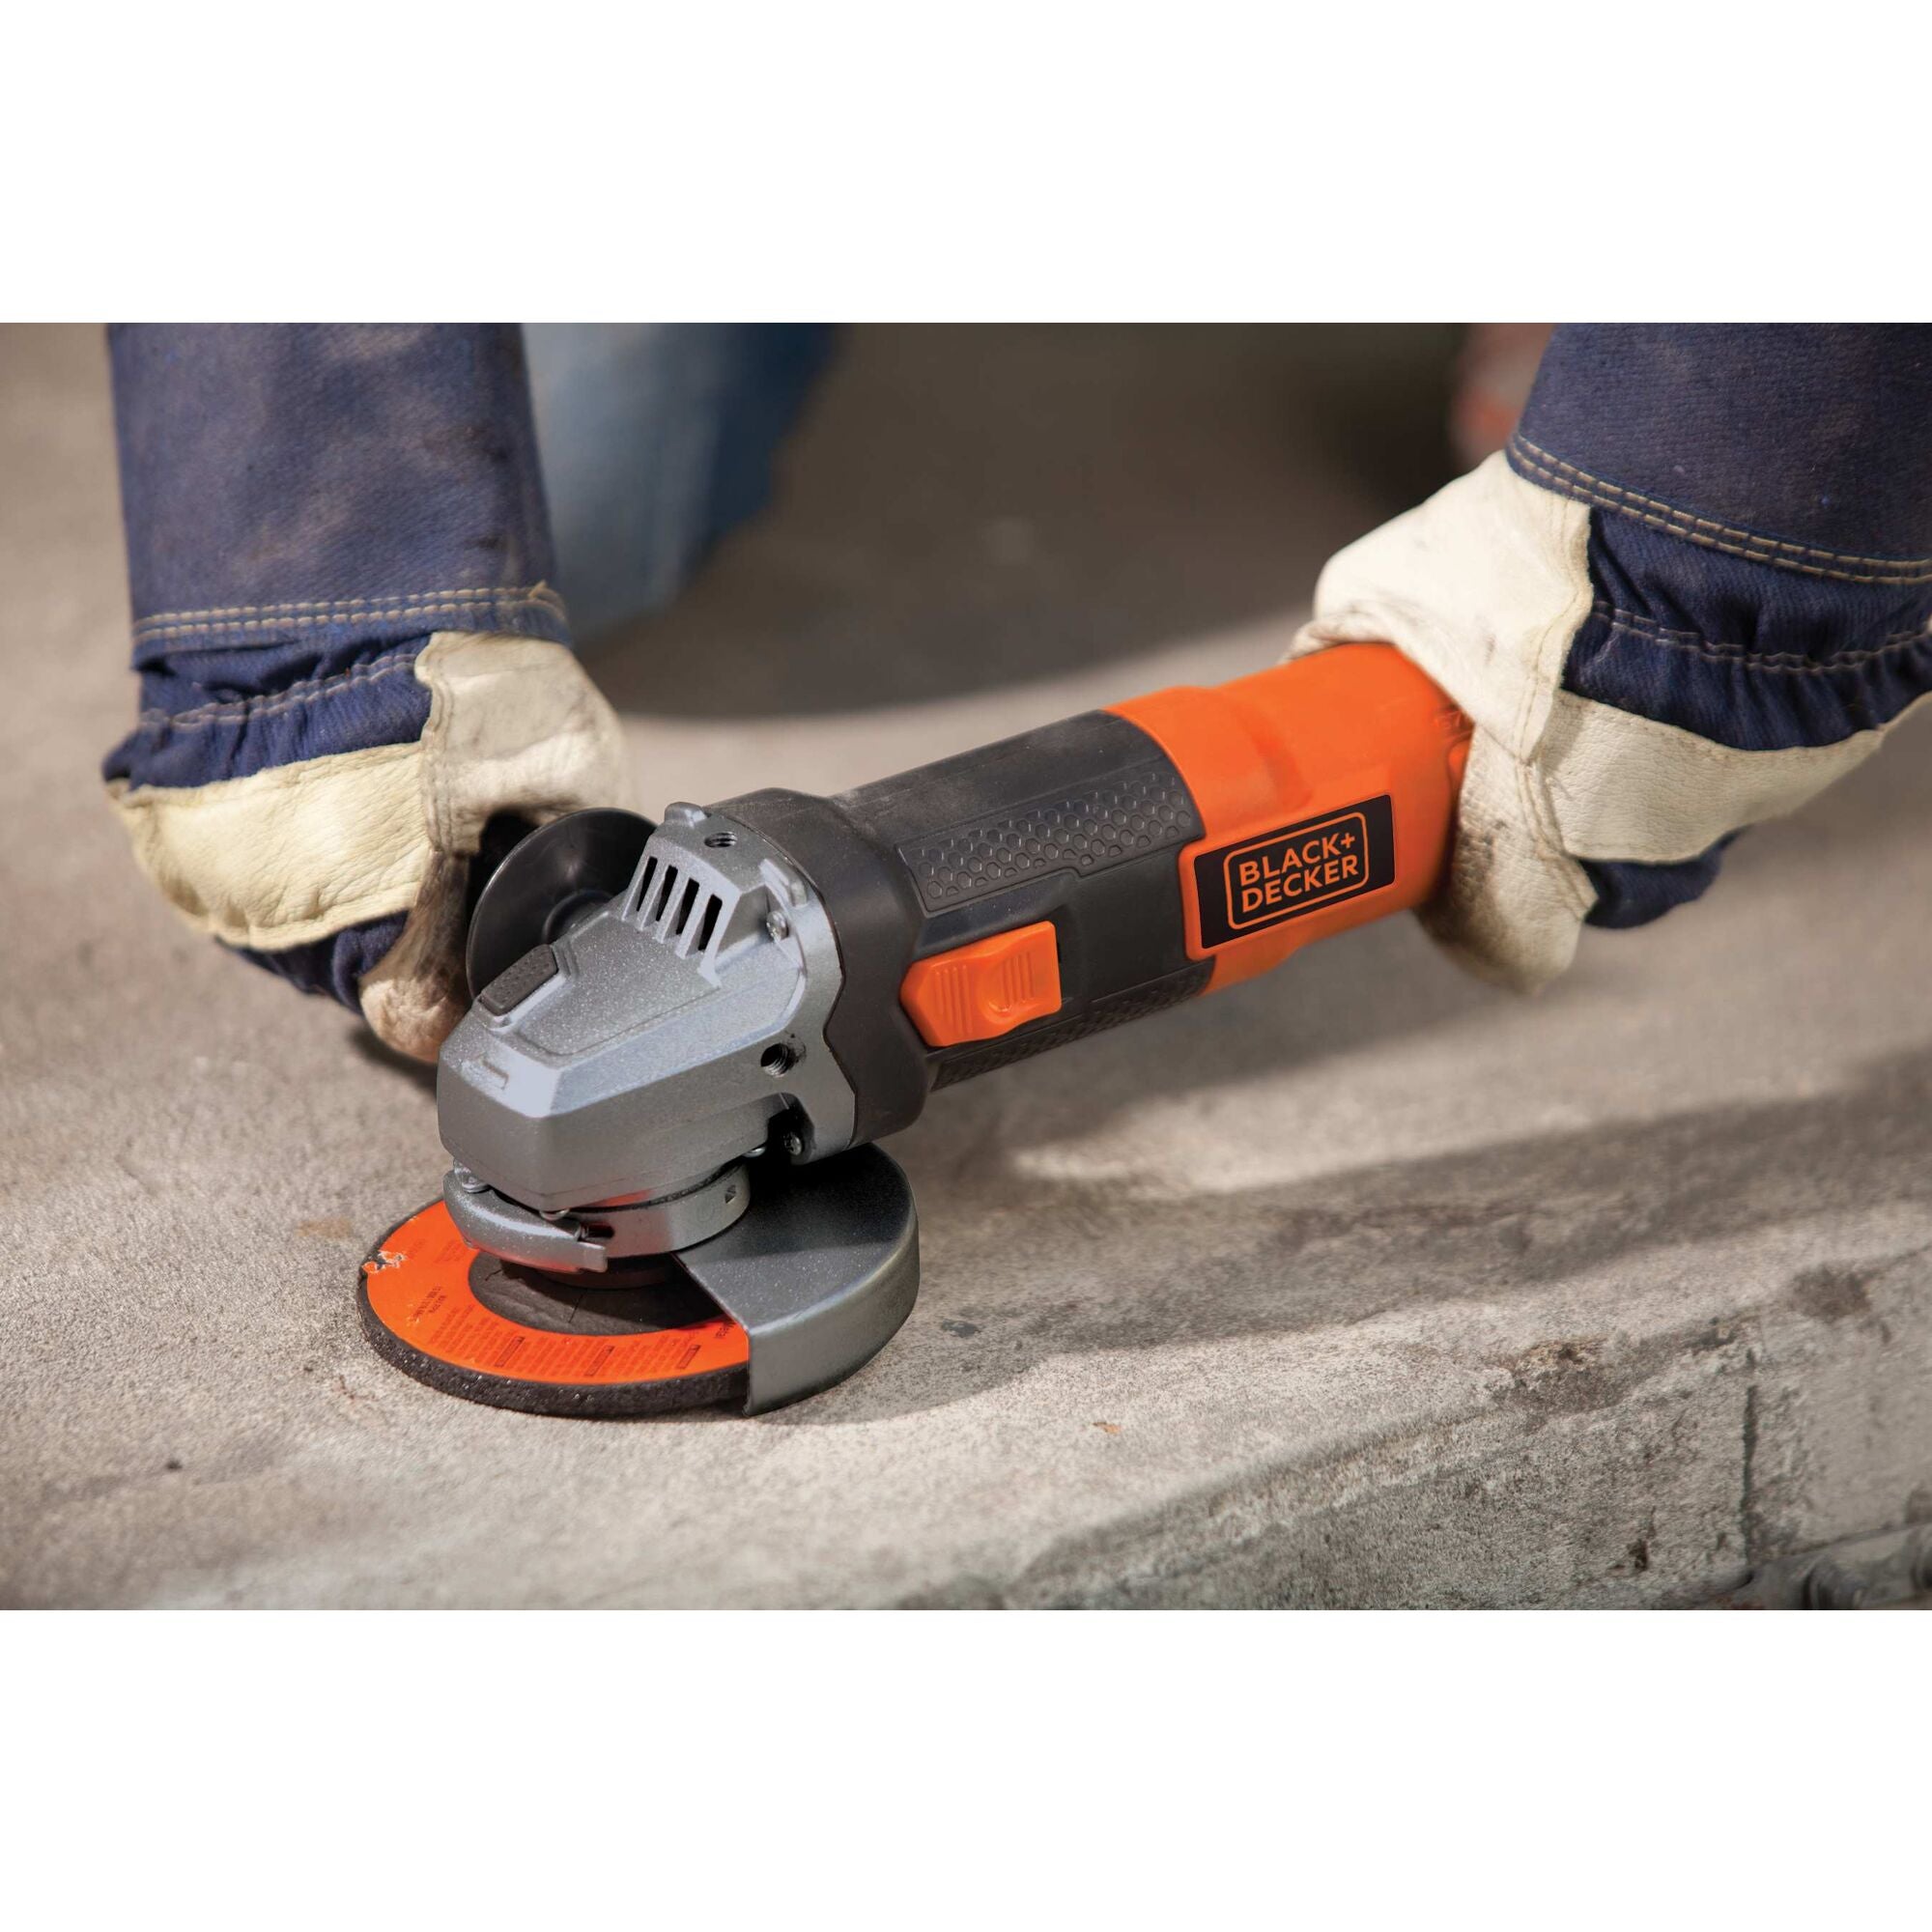 Black and Decker 2750 - 4-1/2 Angle Grinder Type 100